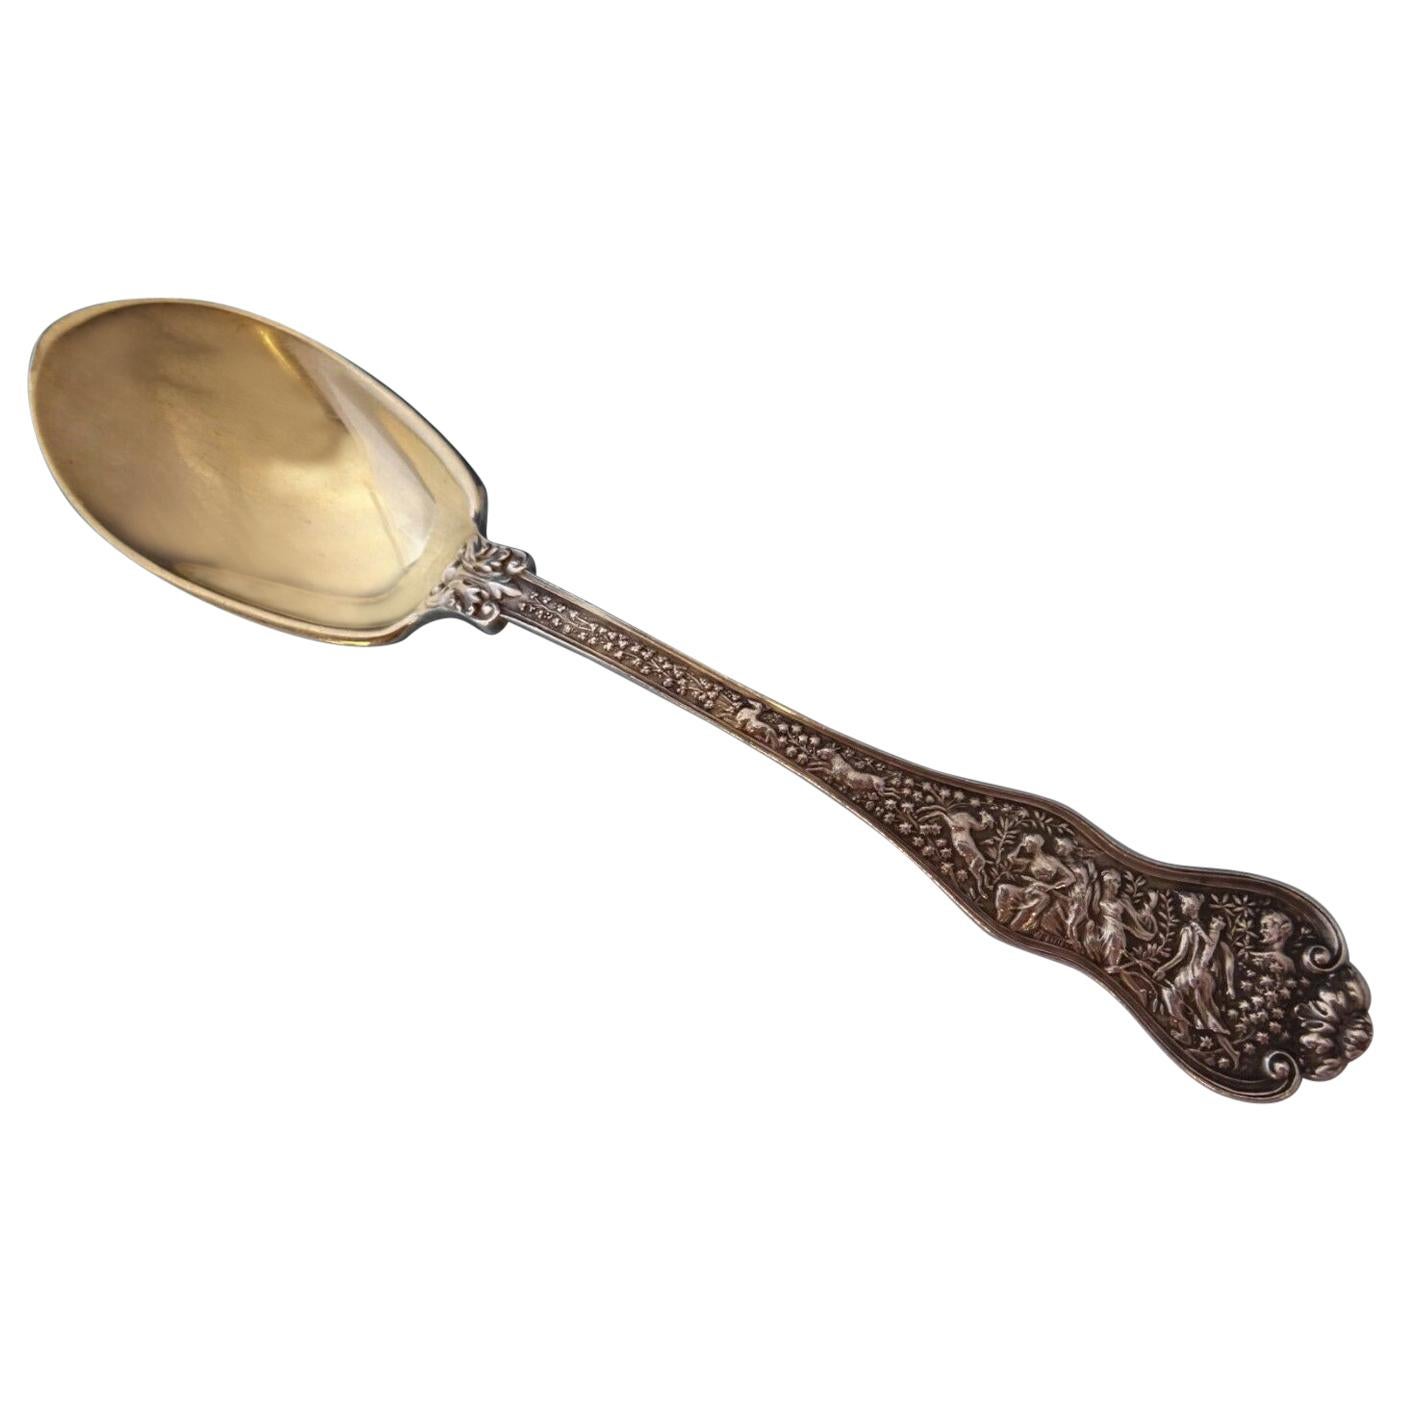 Olympian by Tiffany & Co Sterling Silver Ice Cream Spoon Gold Washed